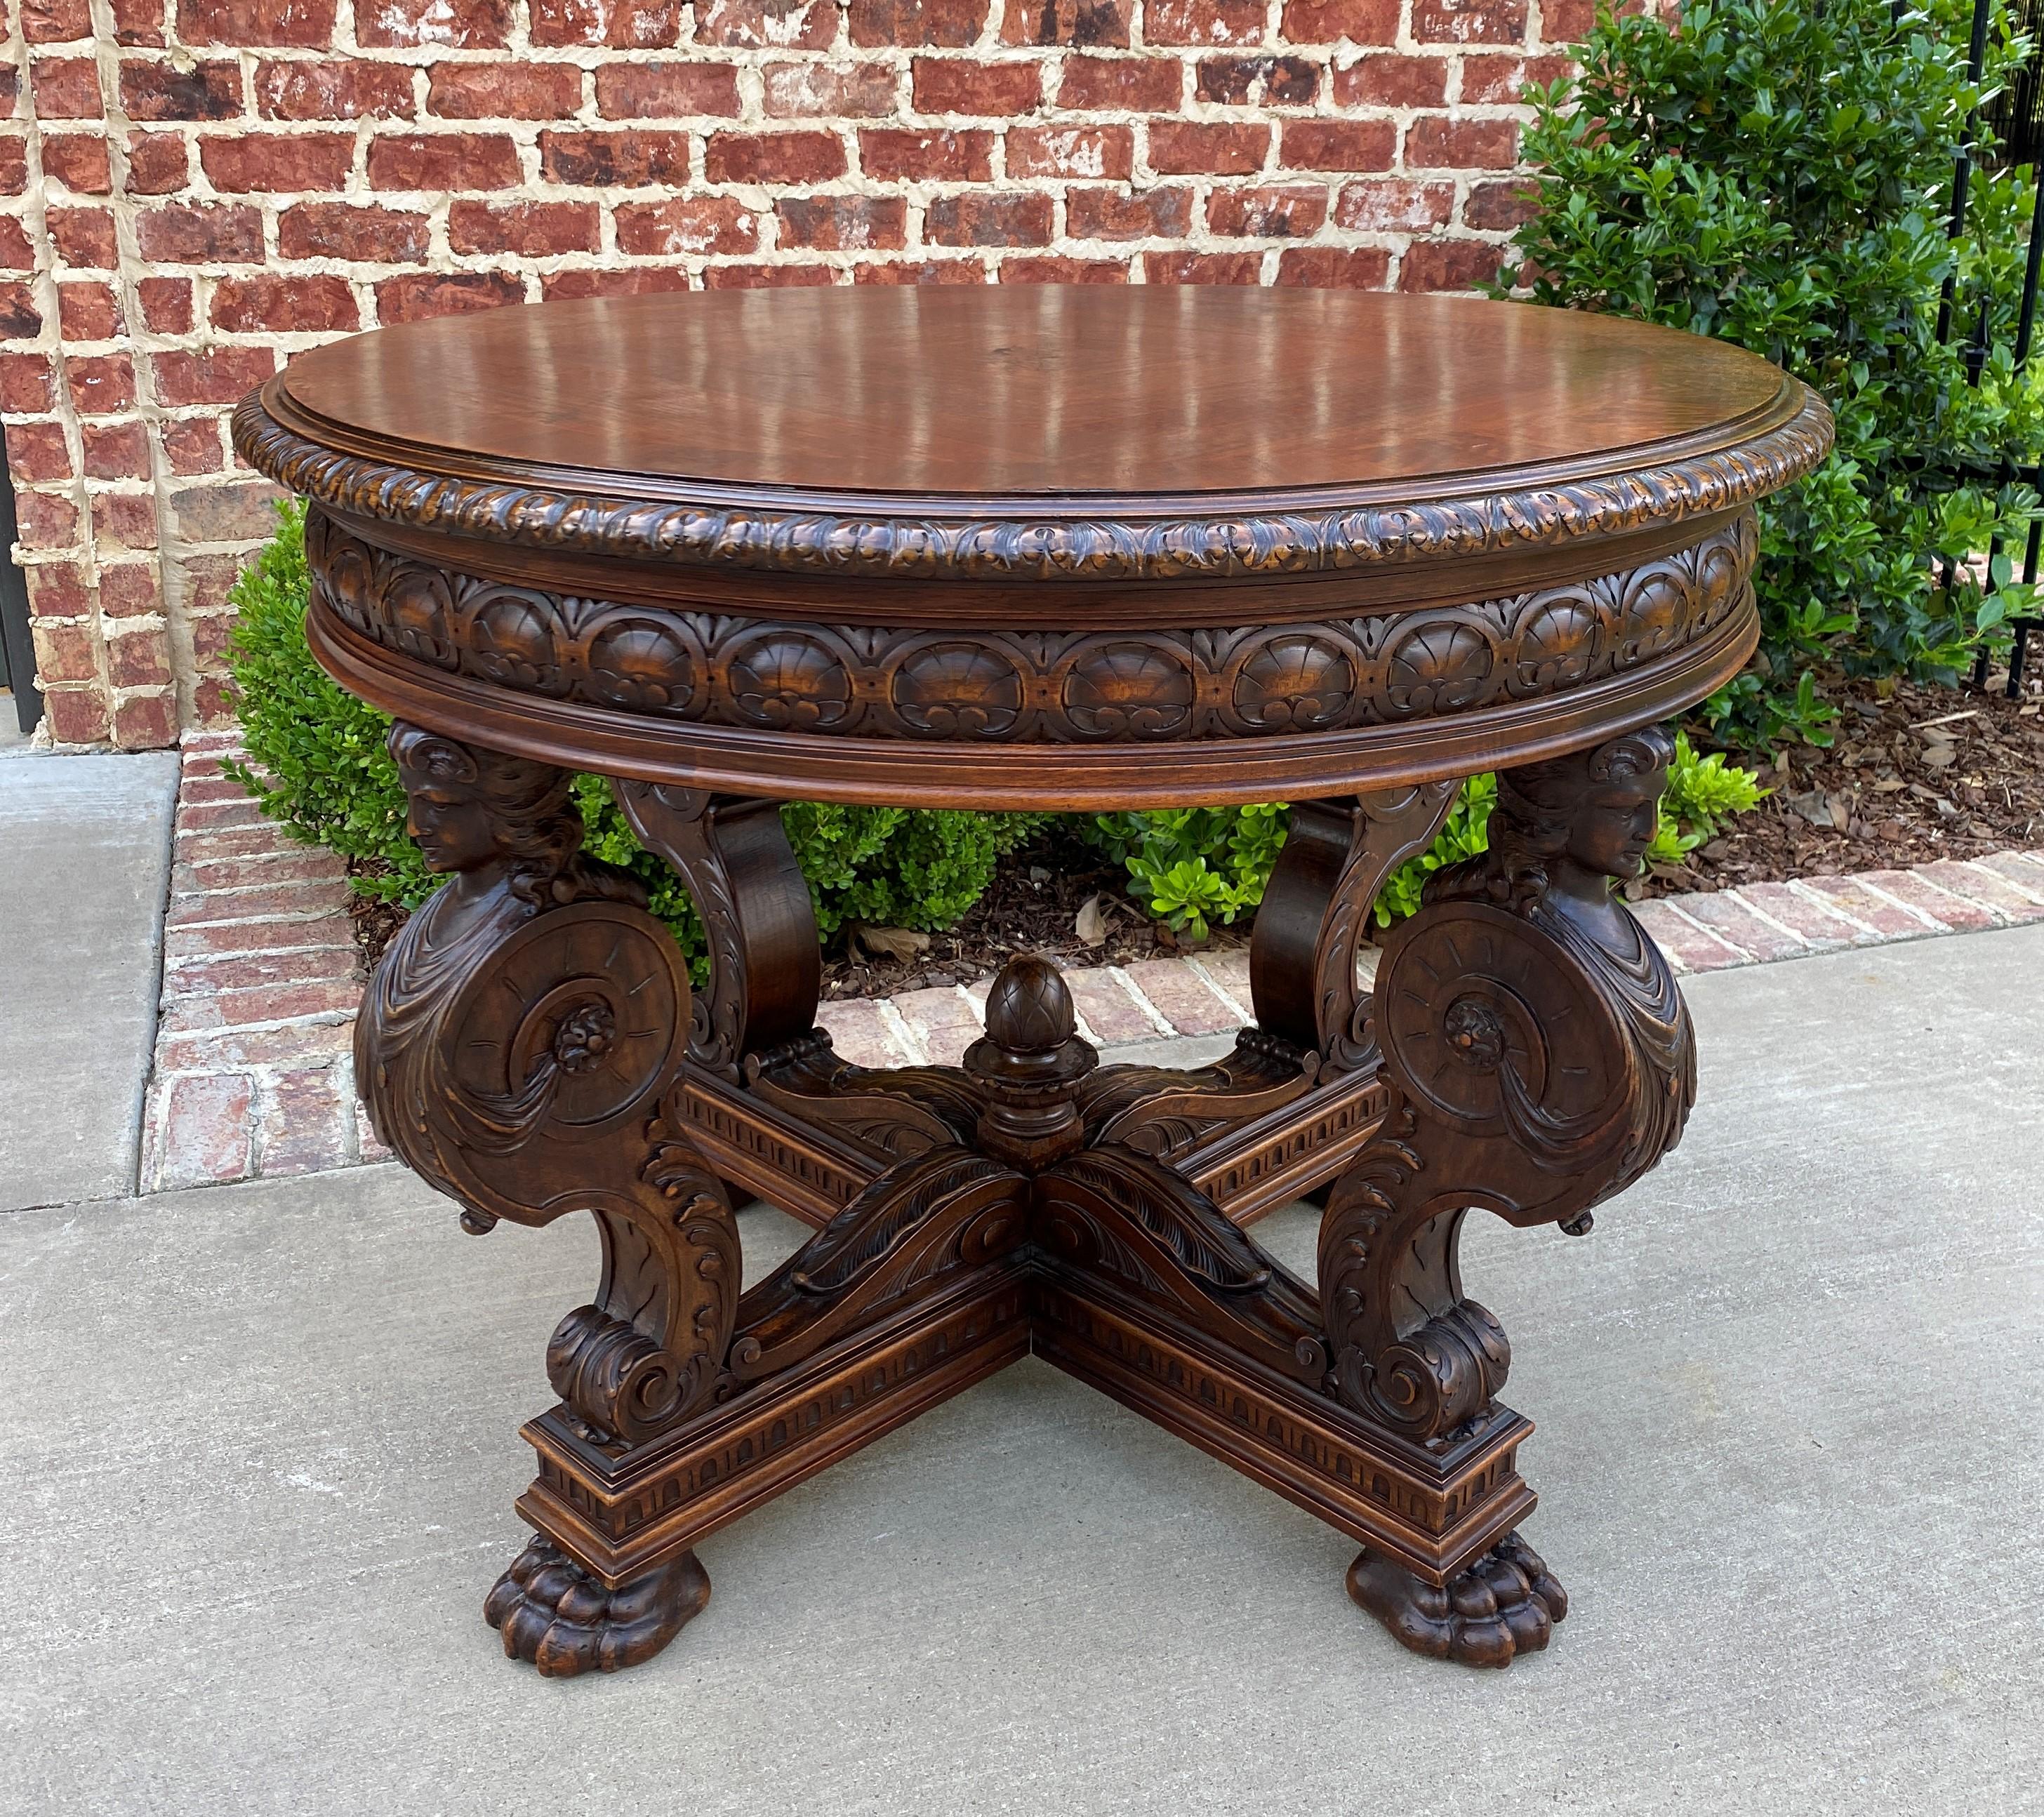 Antique French Round Table Entry Center Parlor Table Renaissance Revival 19th C 6